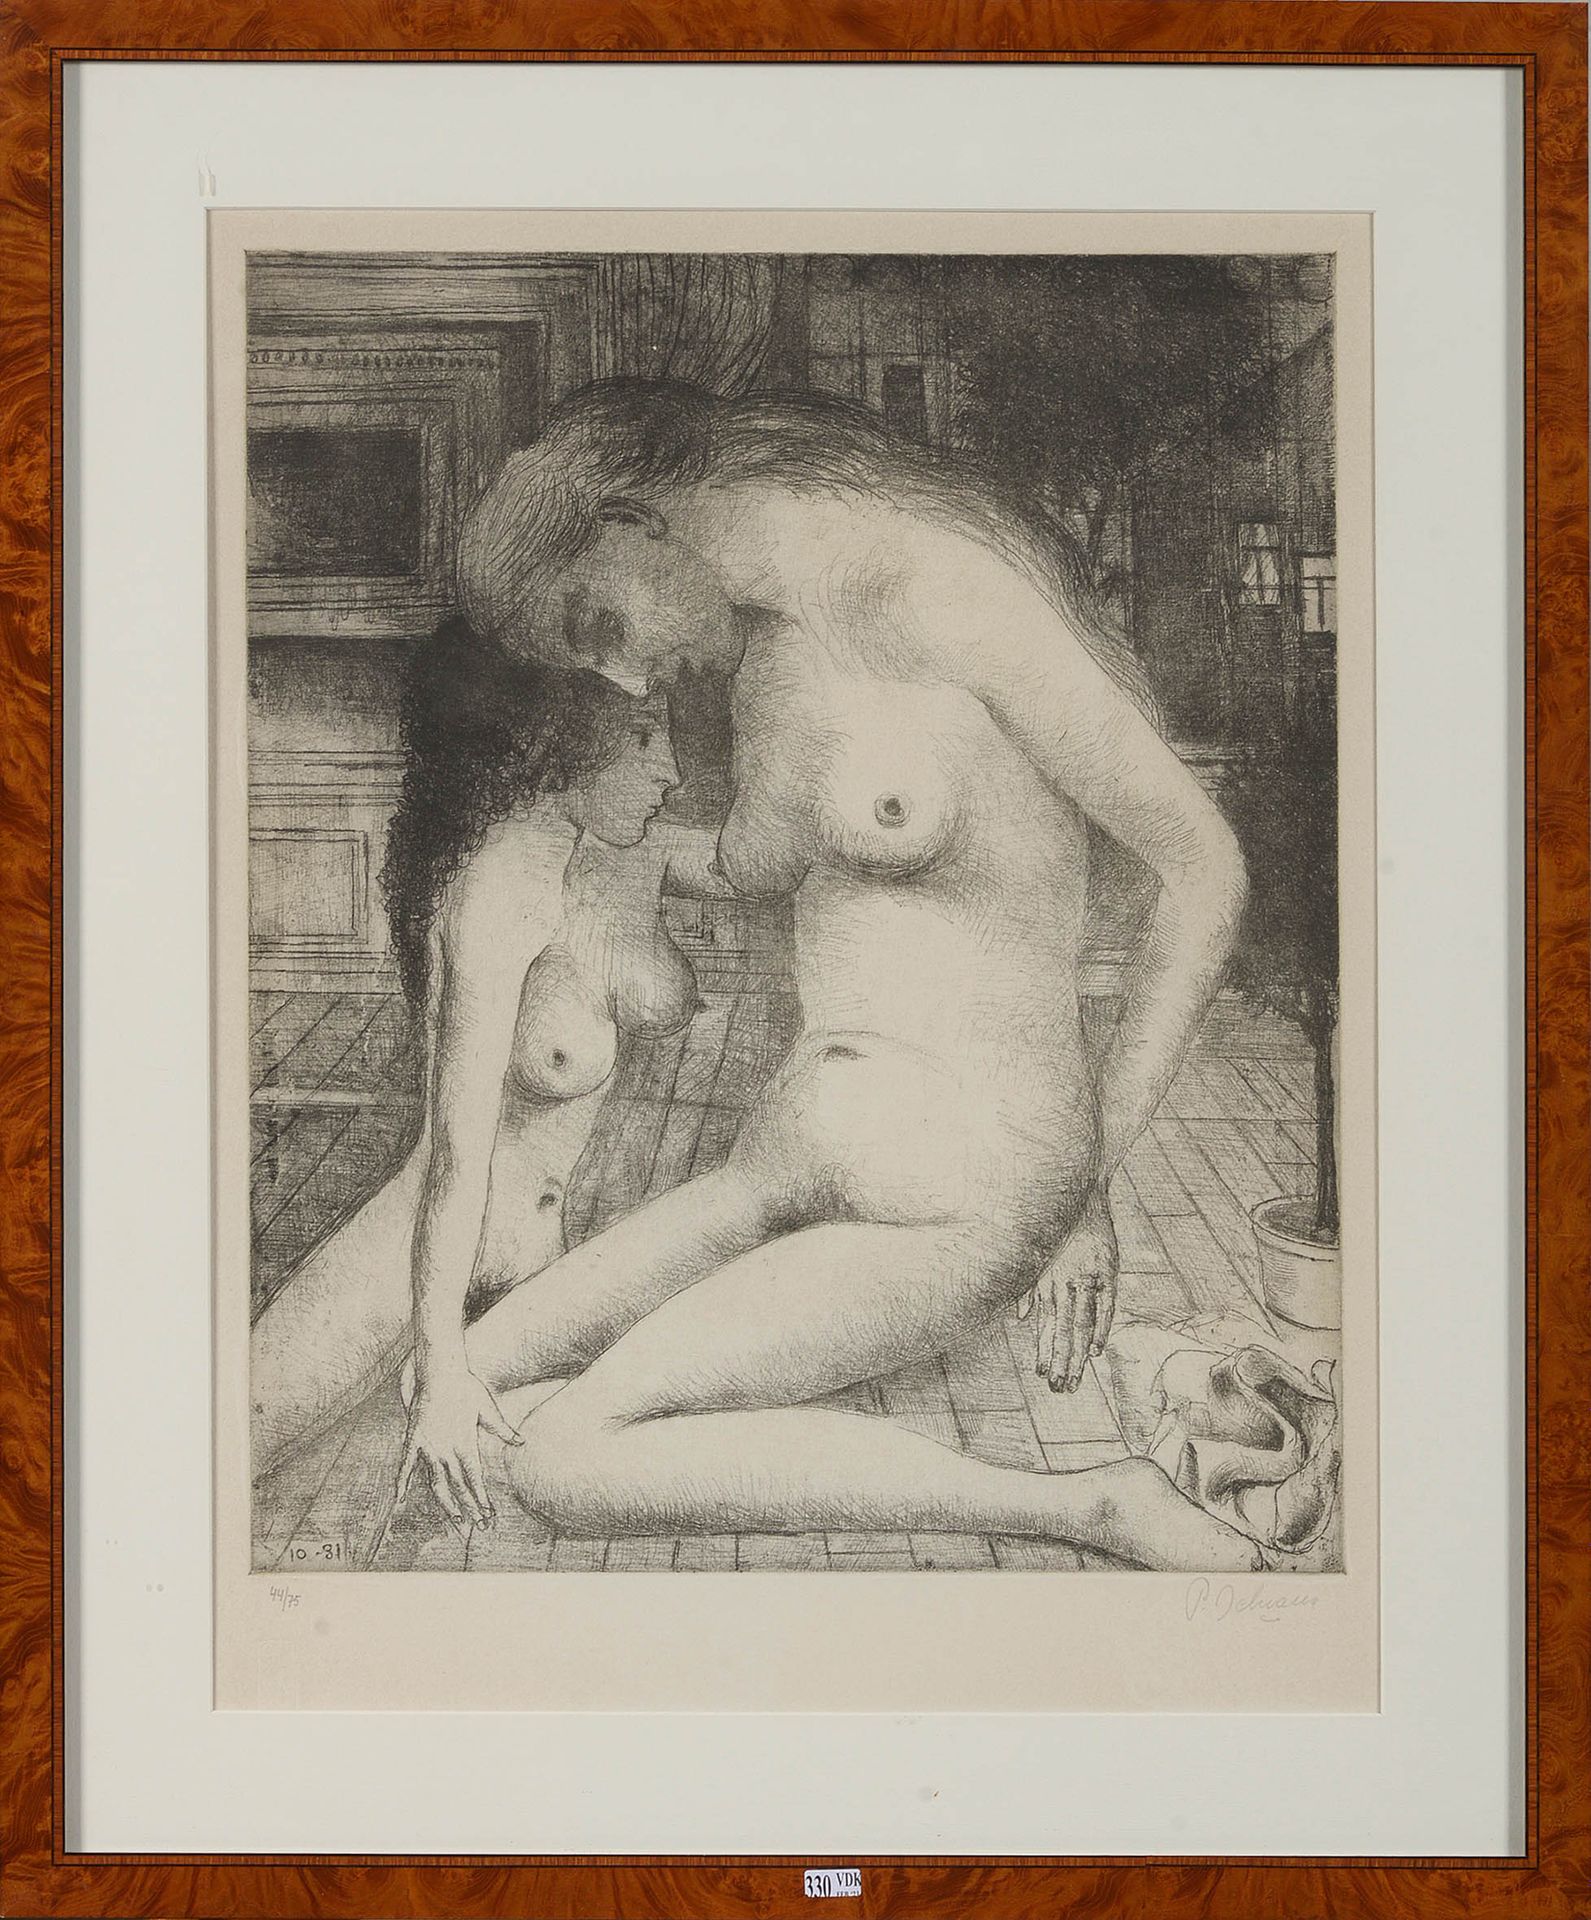 DELVAUX Paul (1897 - 1994) "Les deux amies" black and white etching on paper. Si&hellip;